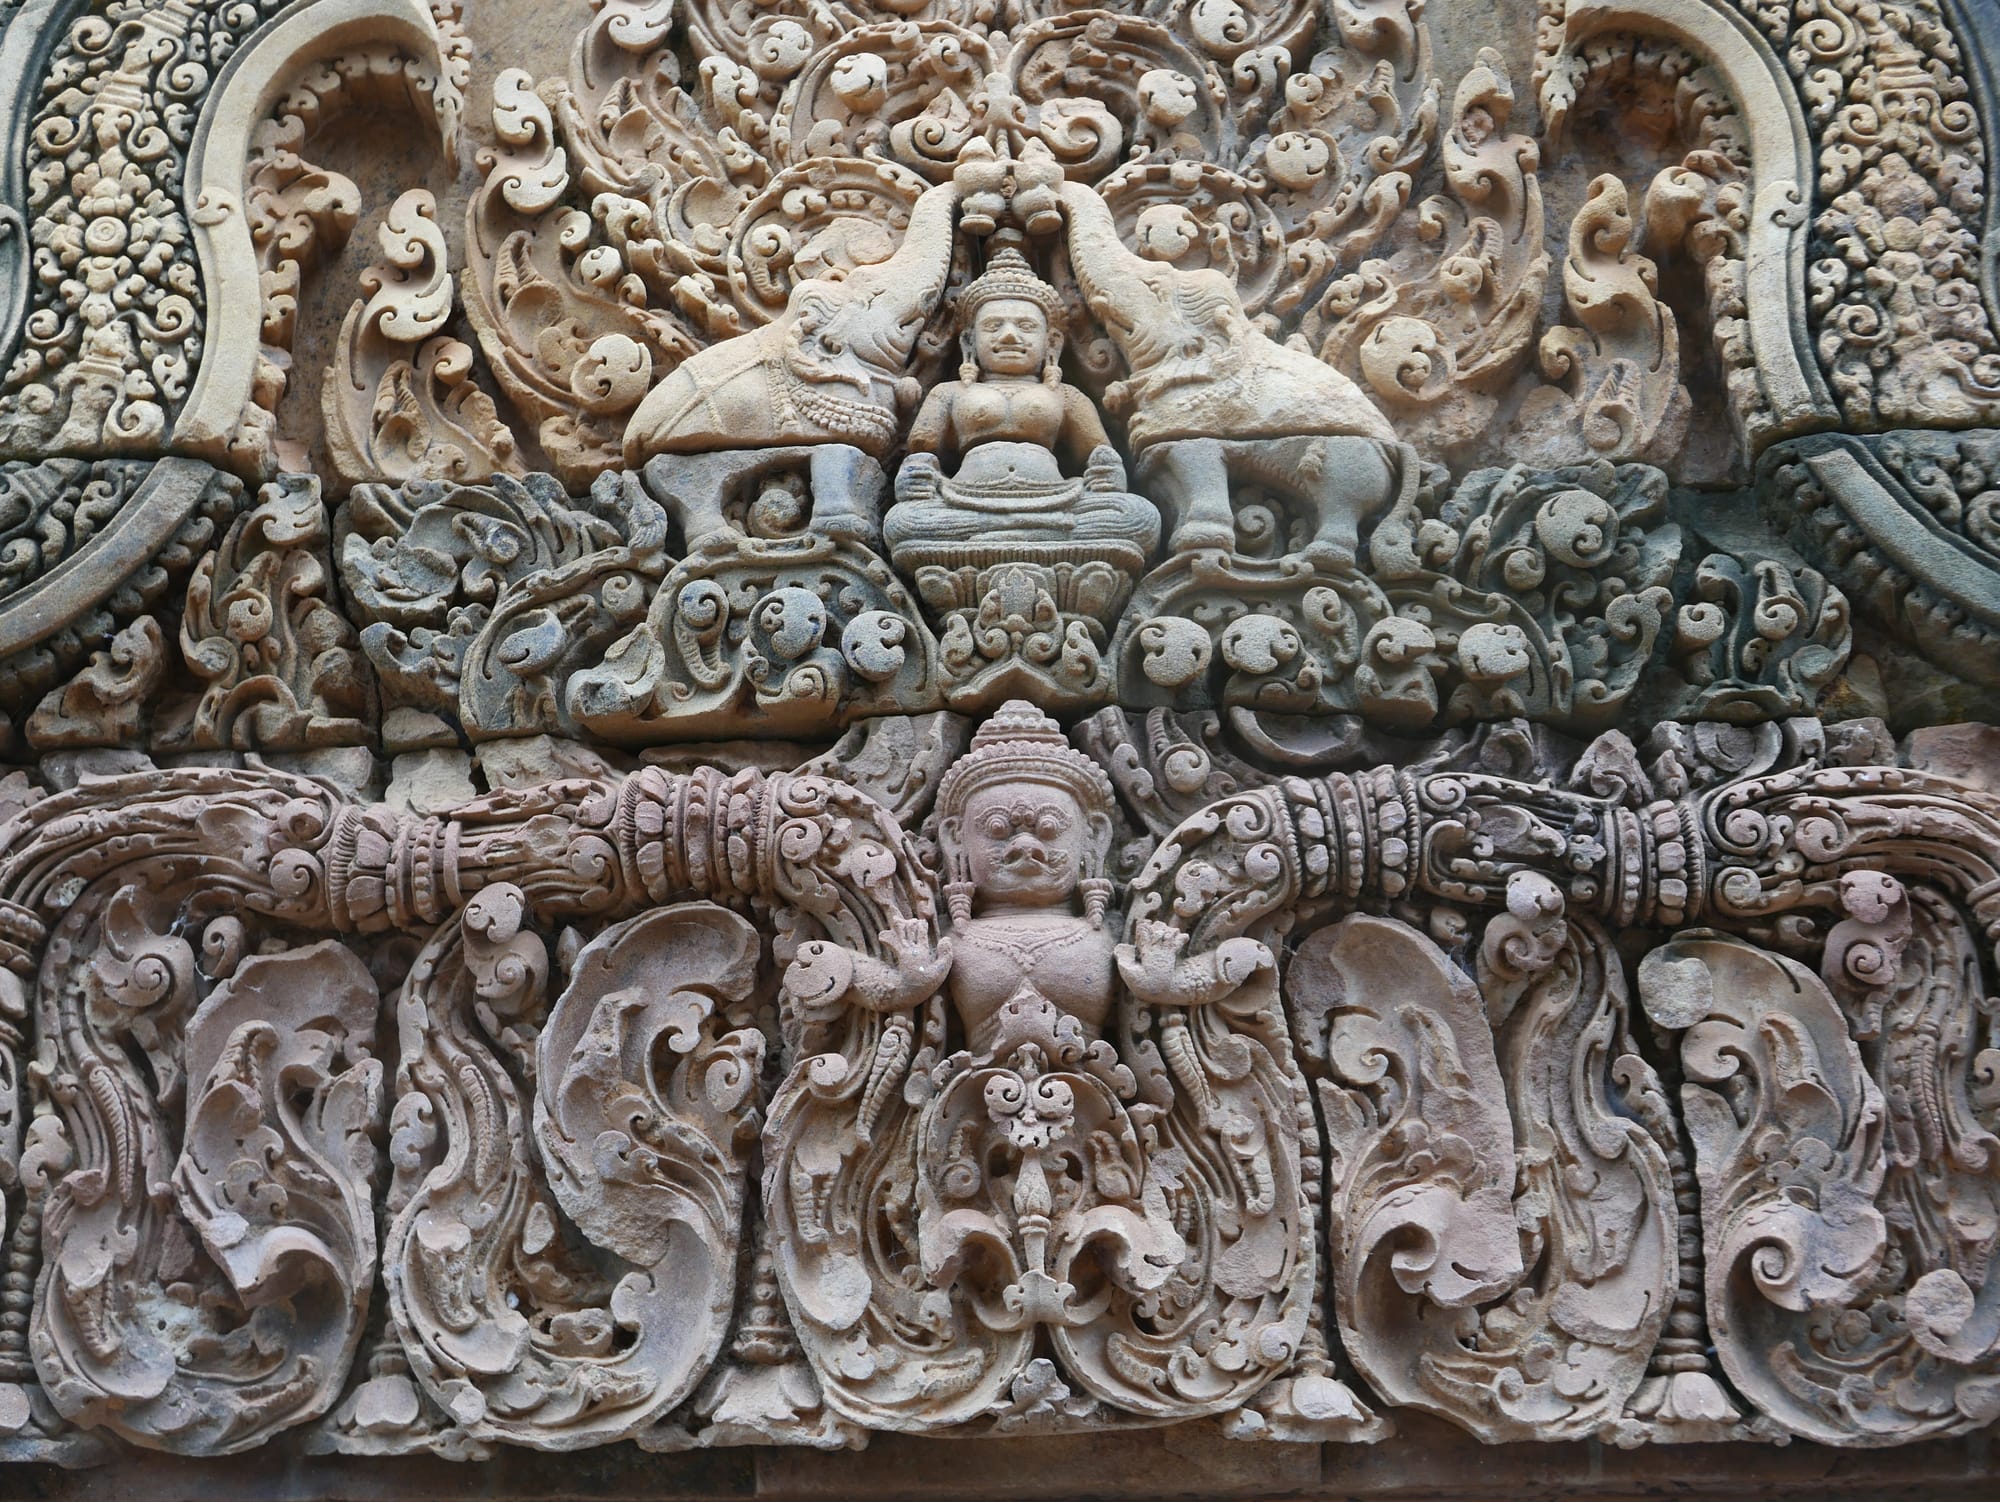 Photo by Author — stunning carvings — Banteay Srei Temple (ប្រាសាទបន្ទាយស្រី), Angkor Archaeological Park, Angkor, Cambodia